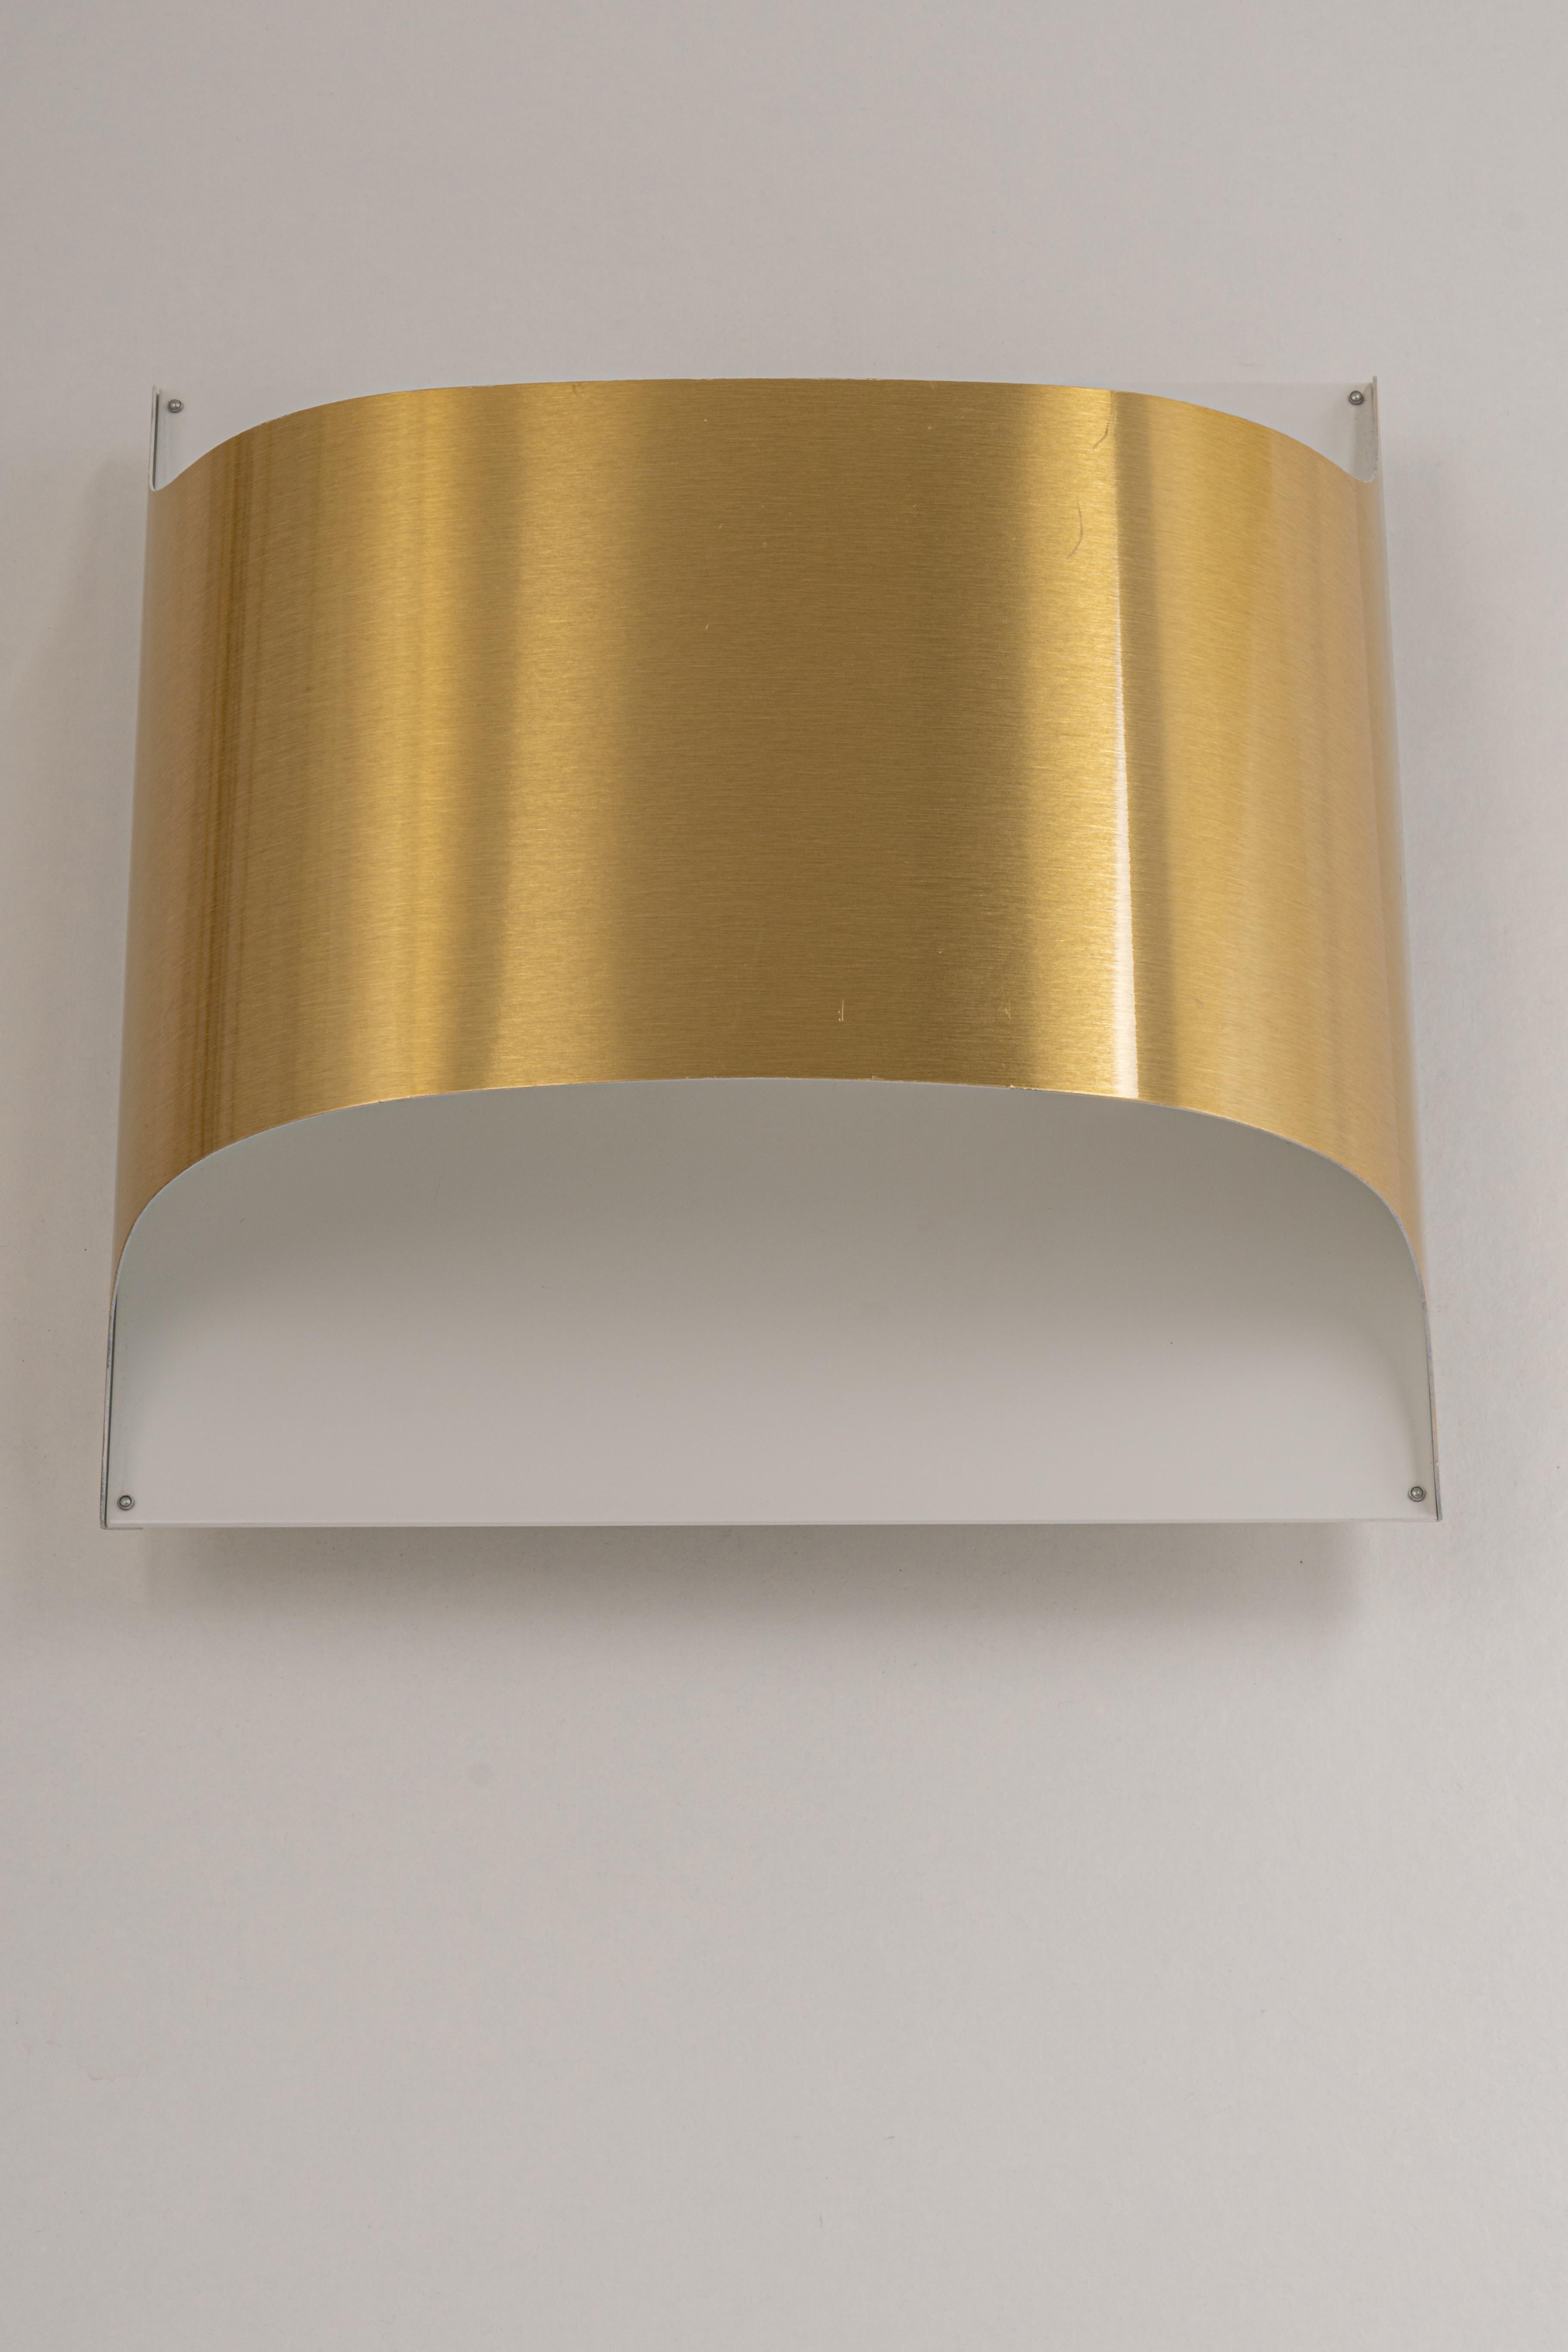 1 of 2 Wall Sconces Designed by Staff, Germany, 1970s For Sale 1